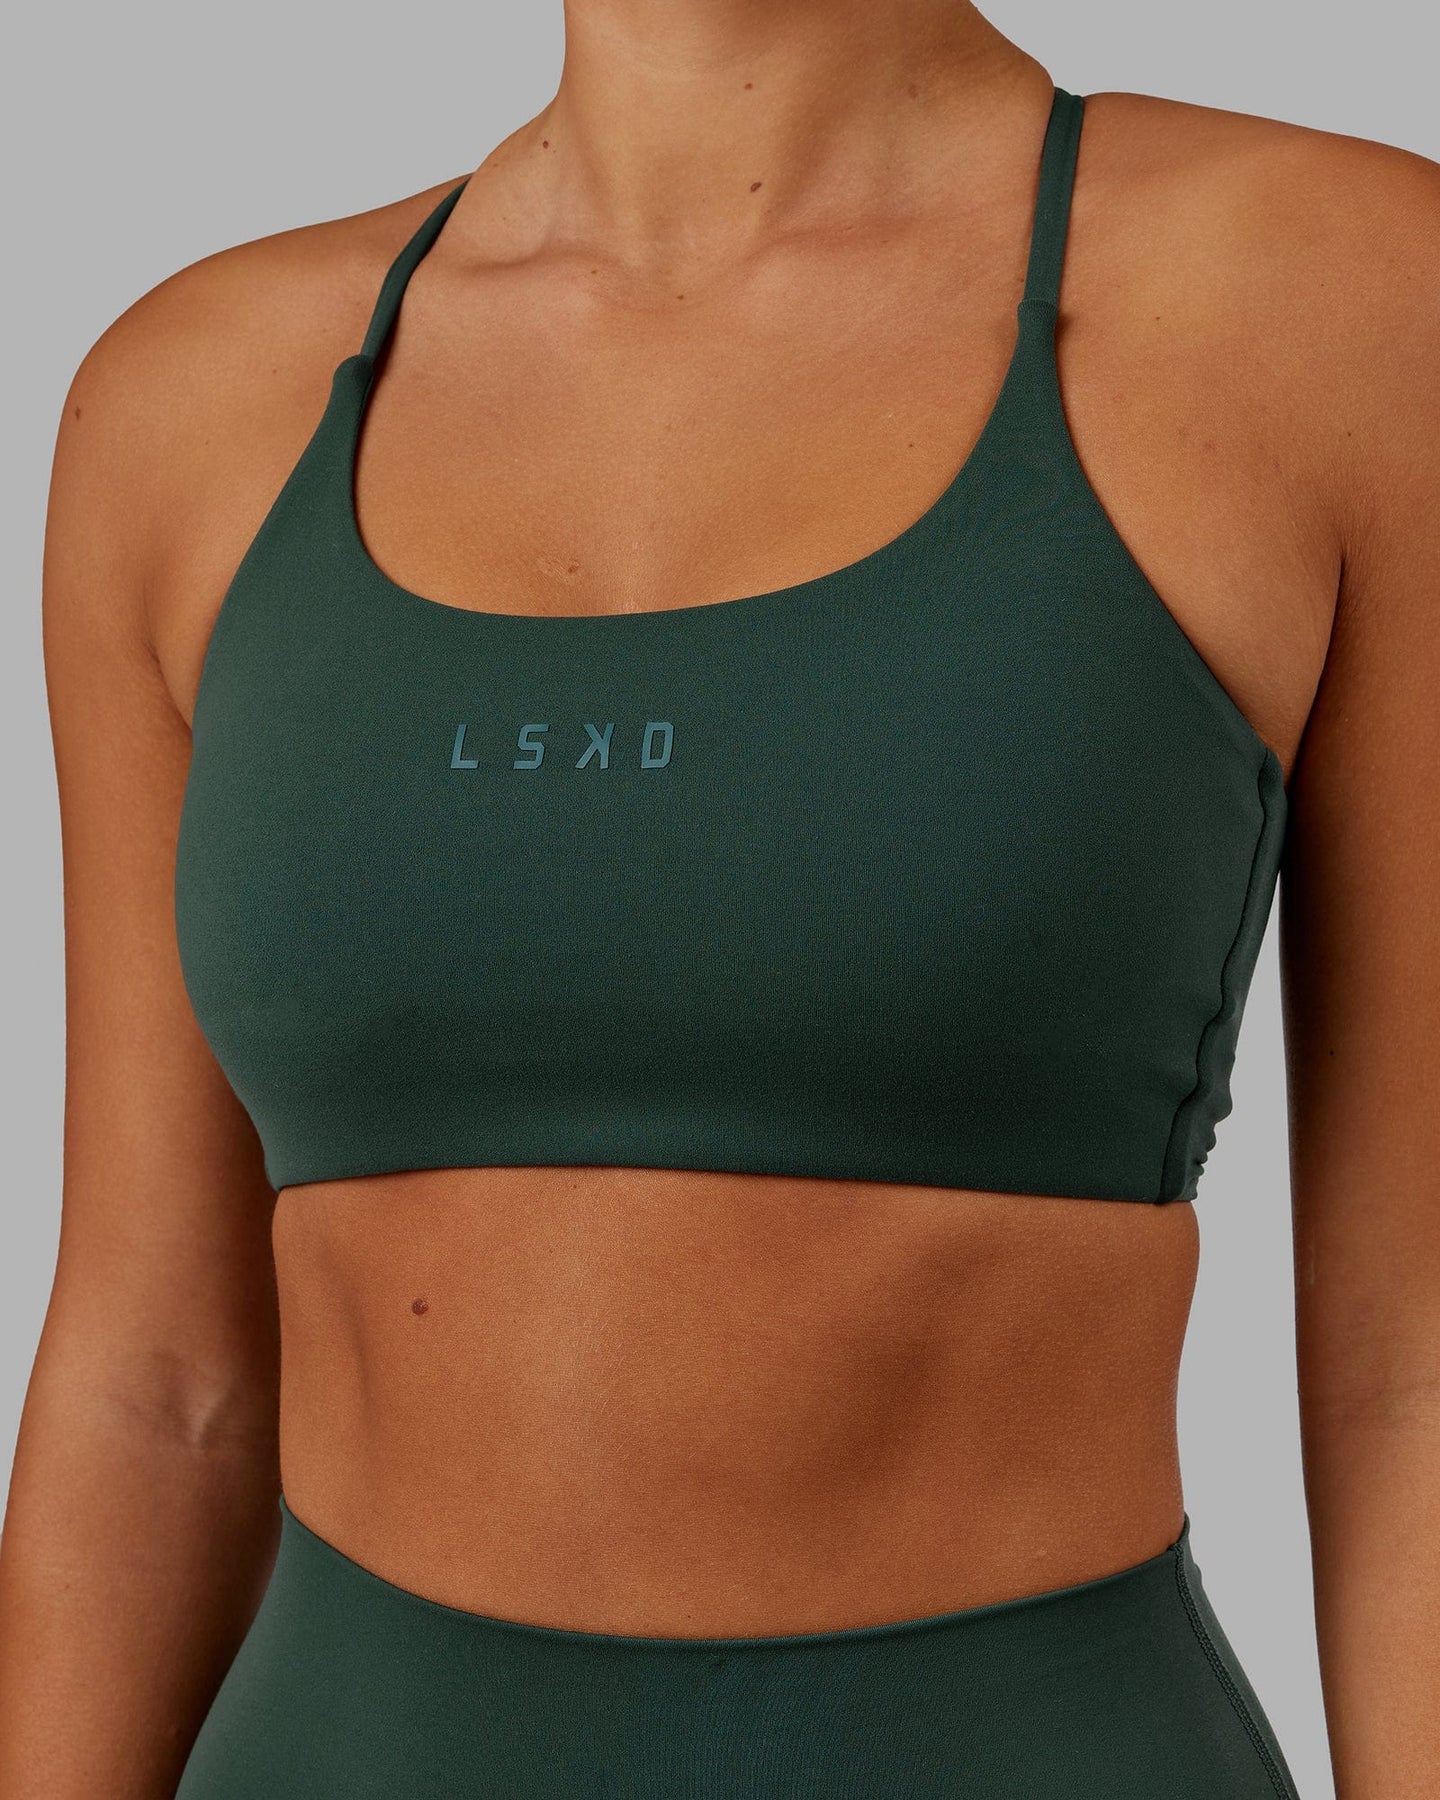 Buy Nykd All day Essential Cotton Sports Bra - NYK059 Beetle Green